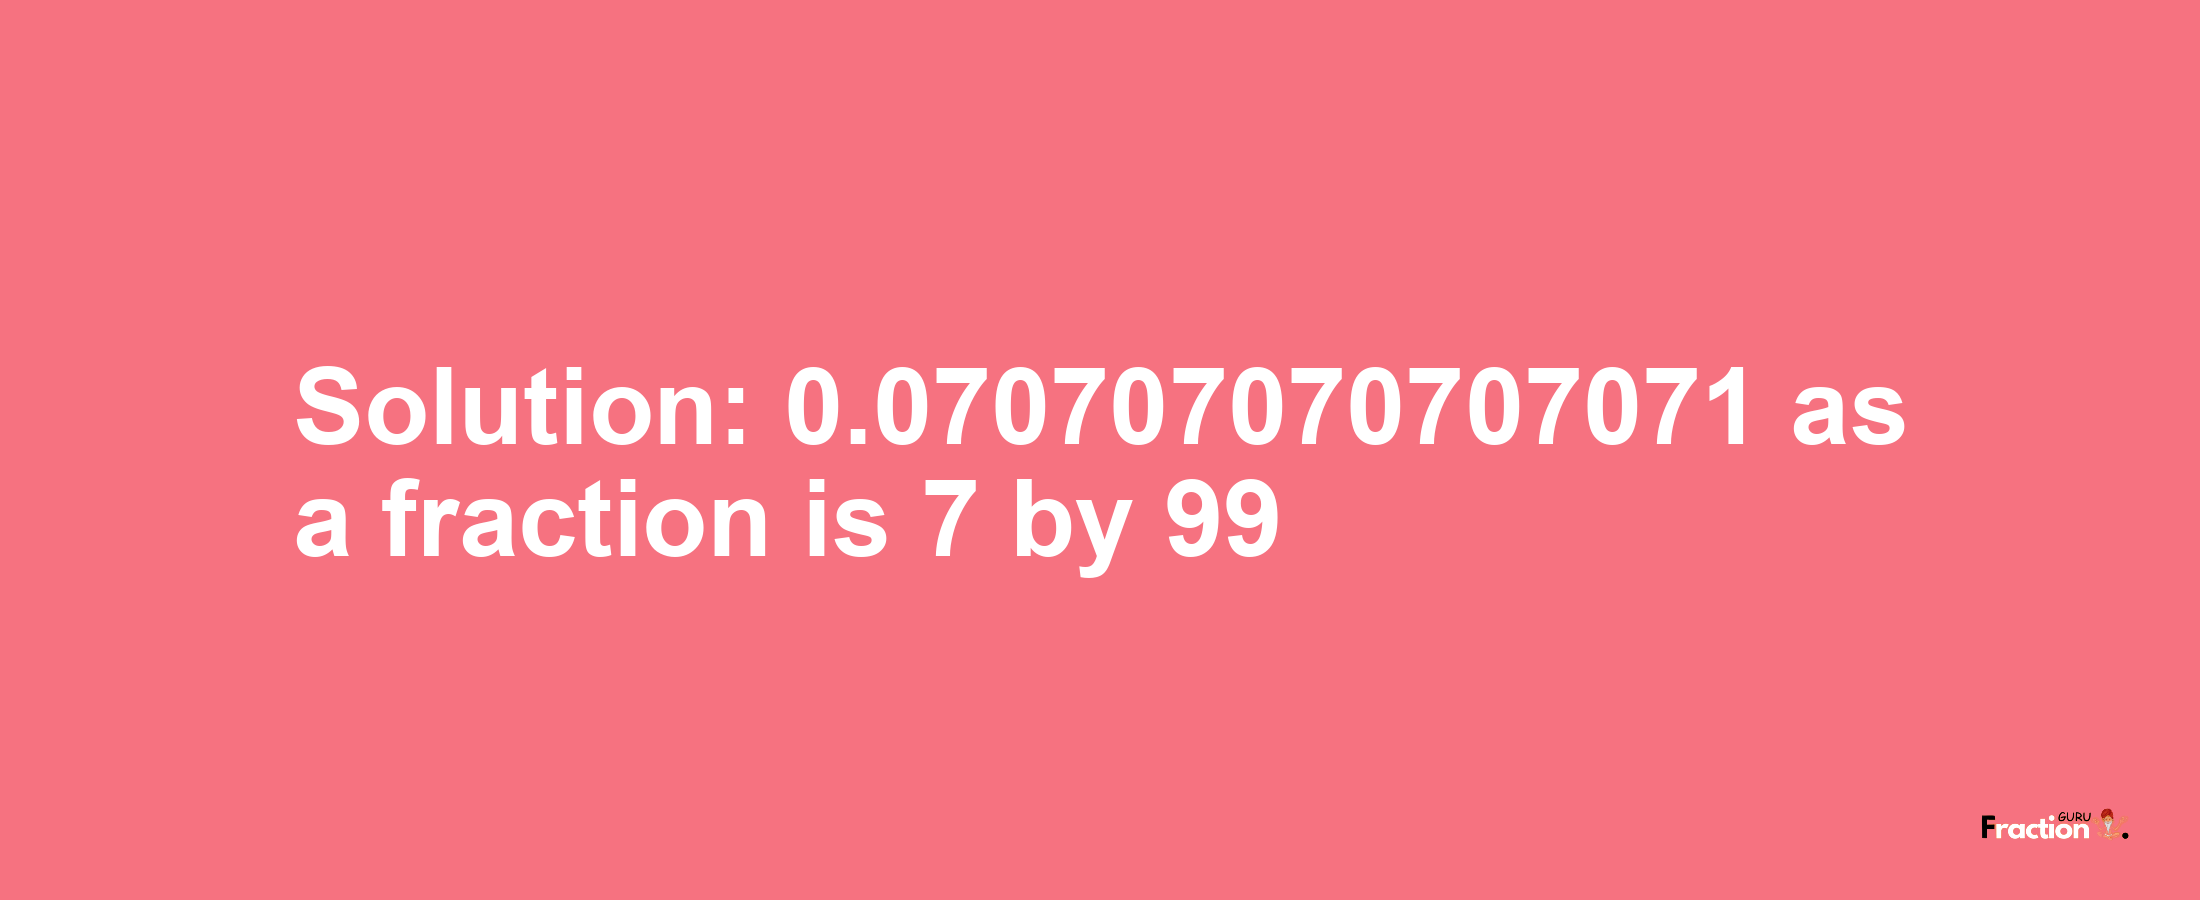 Solution:0.070707070707071 as a fraction is 7/99